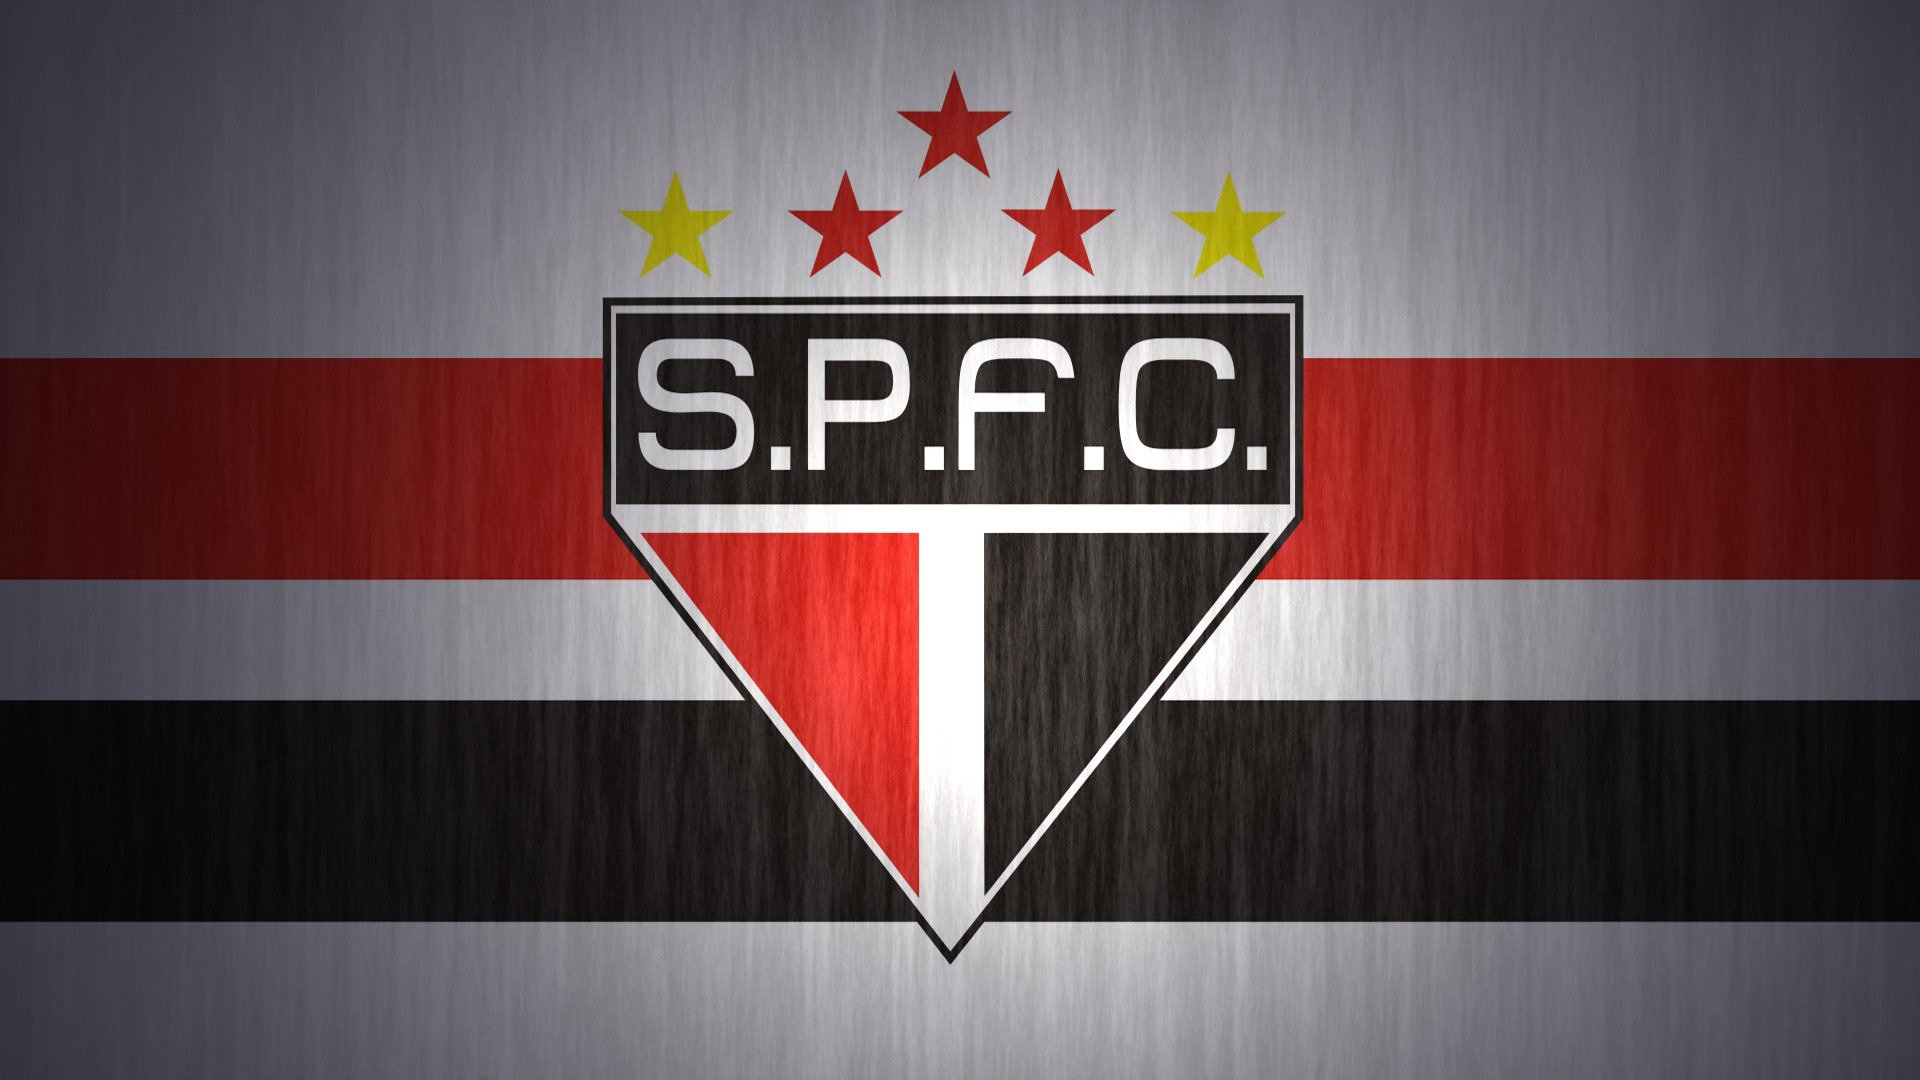 Nice Images Collection: São Paulo FC Desktop Wallpapers